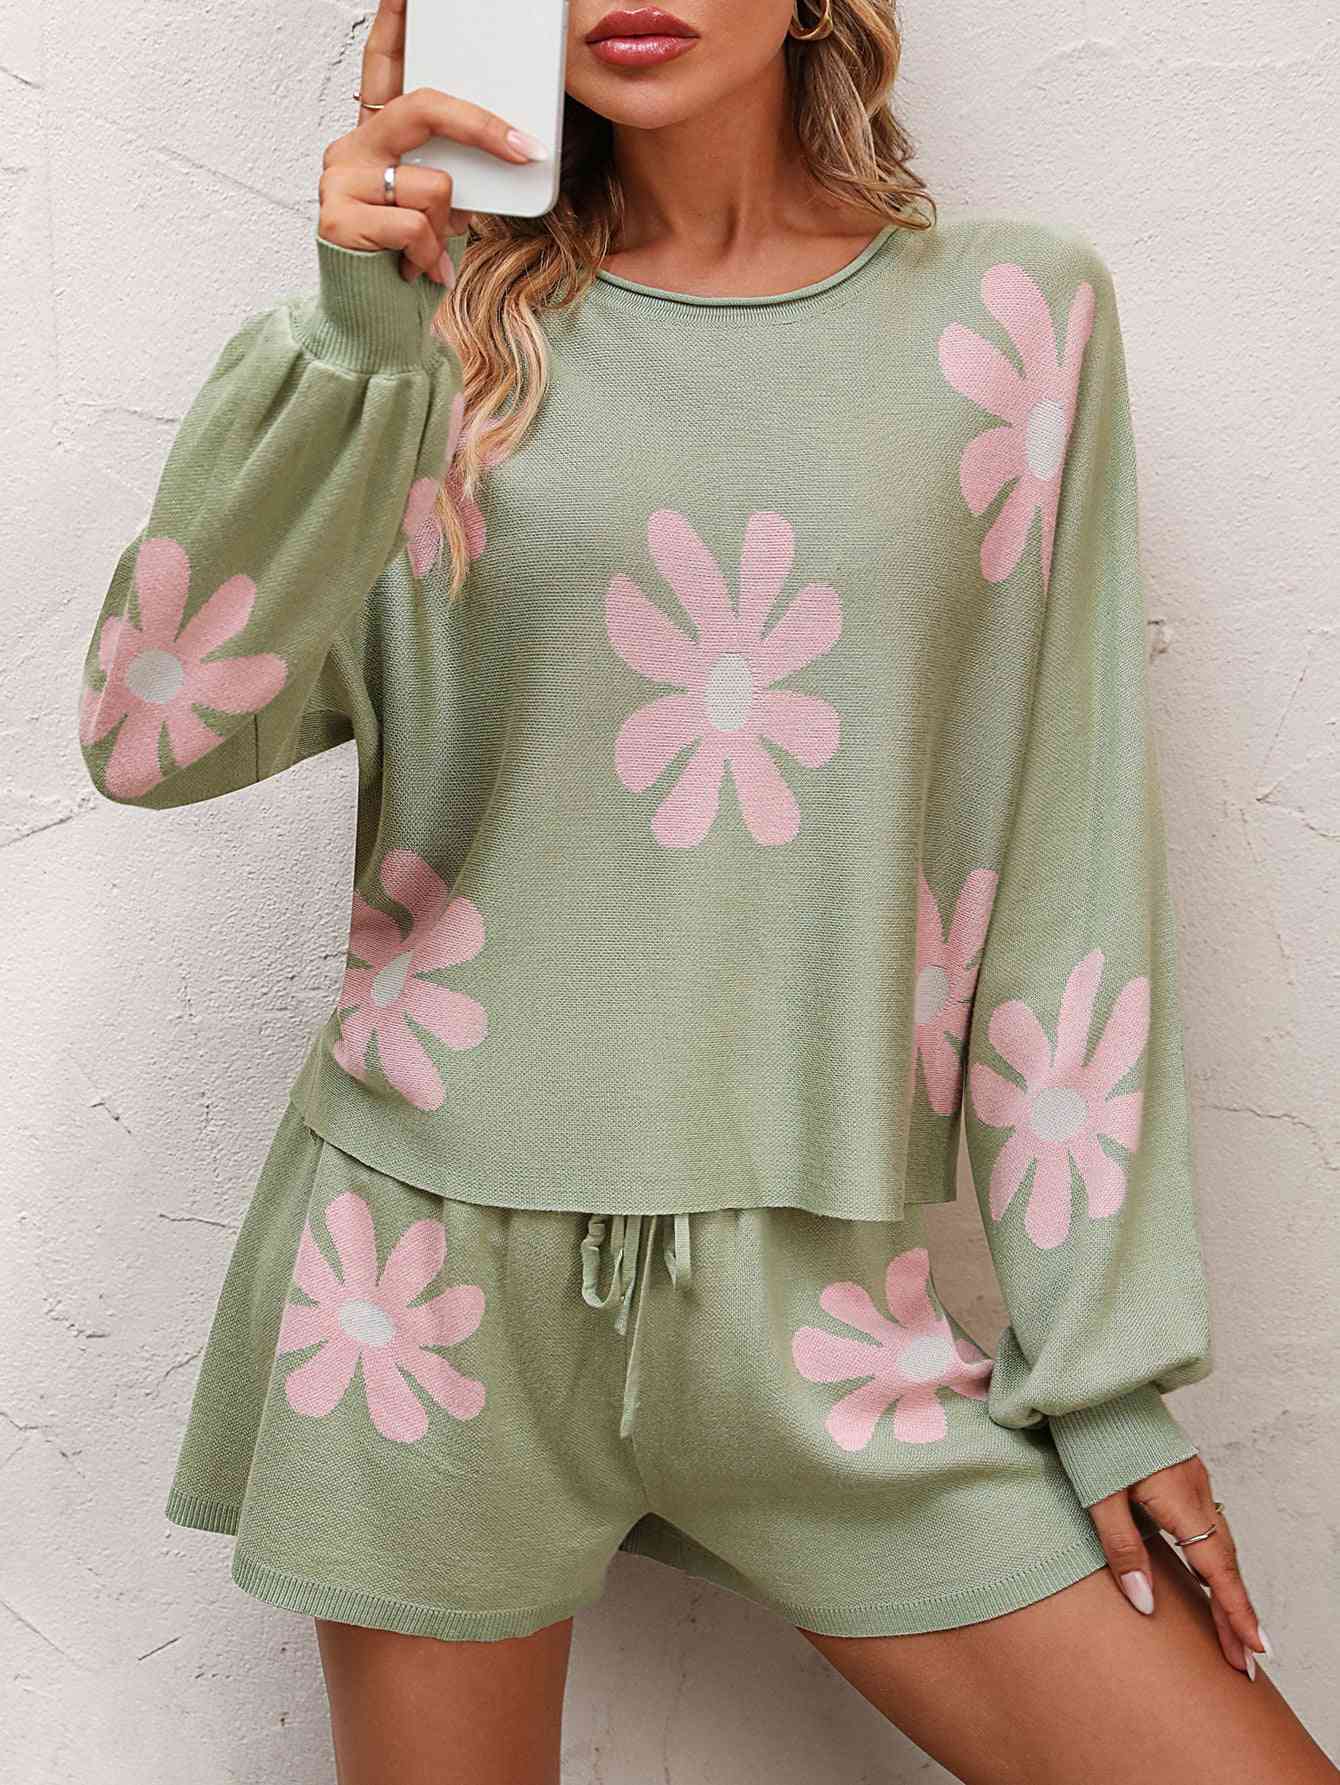 Women's Floral Print Raglan Sleeve Knit Top and Tie Front Sweater Shorts Set Sage